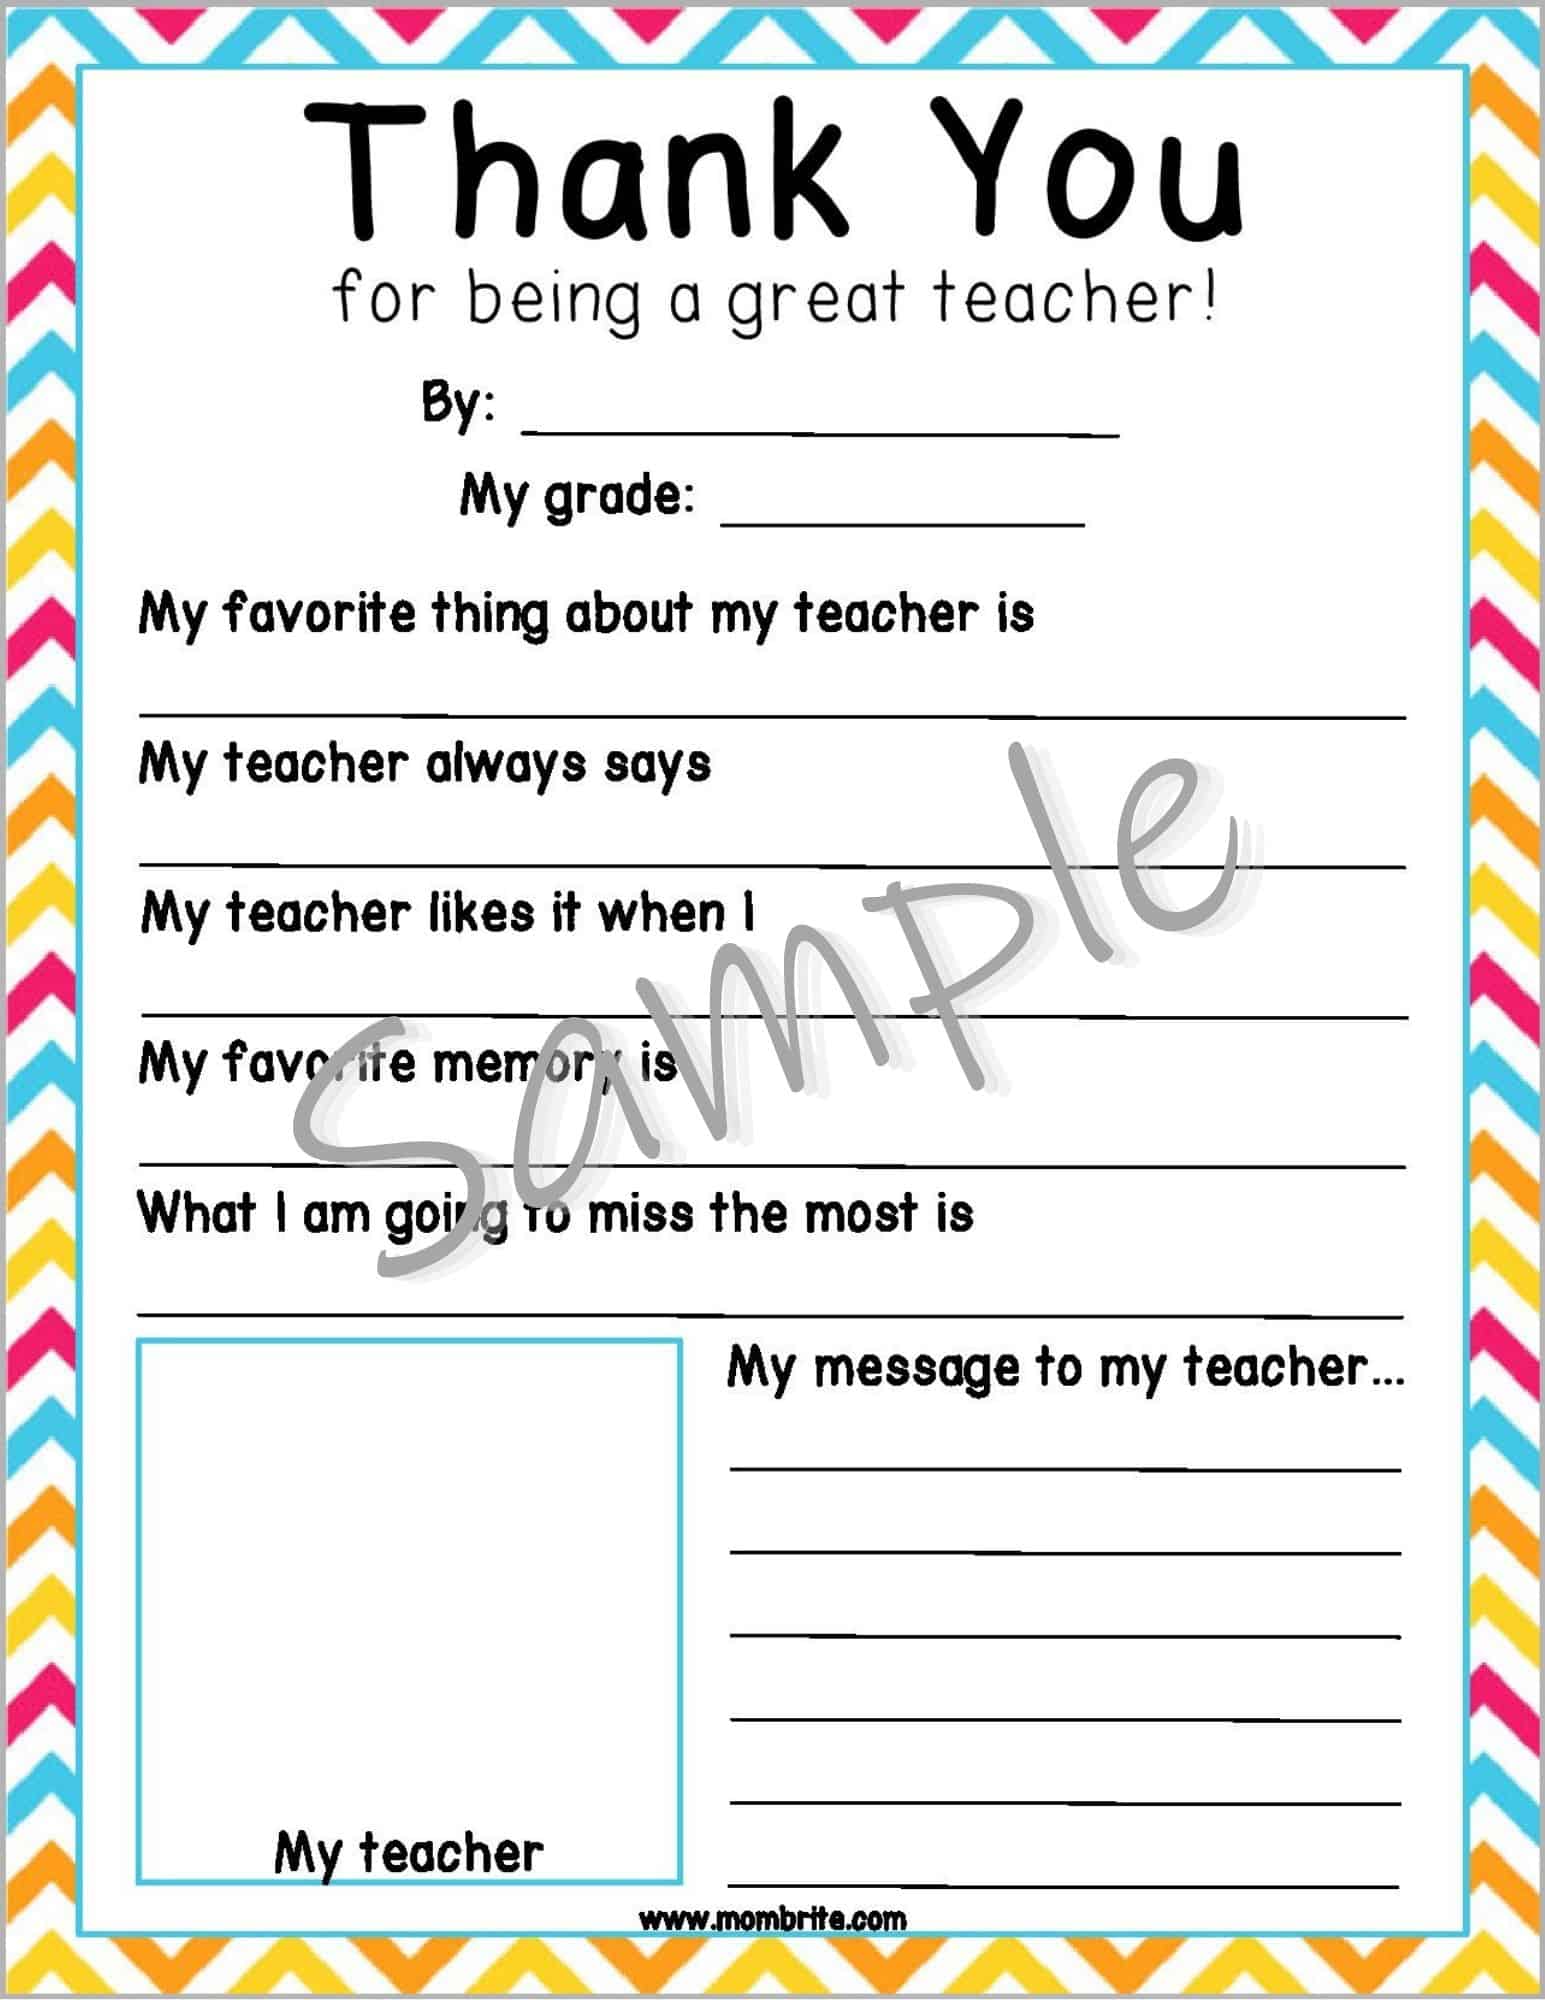 Thank You for Being a Great Teacher Printable